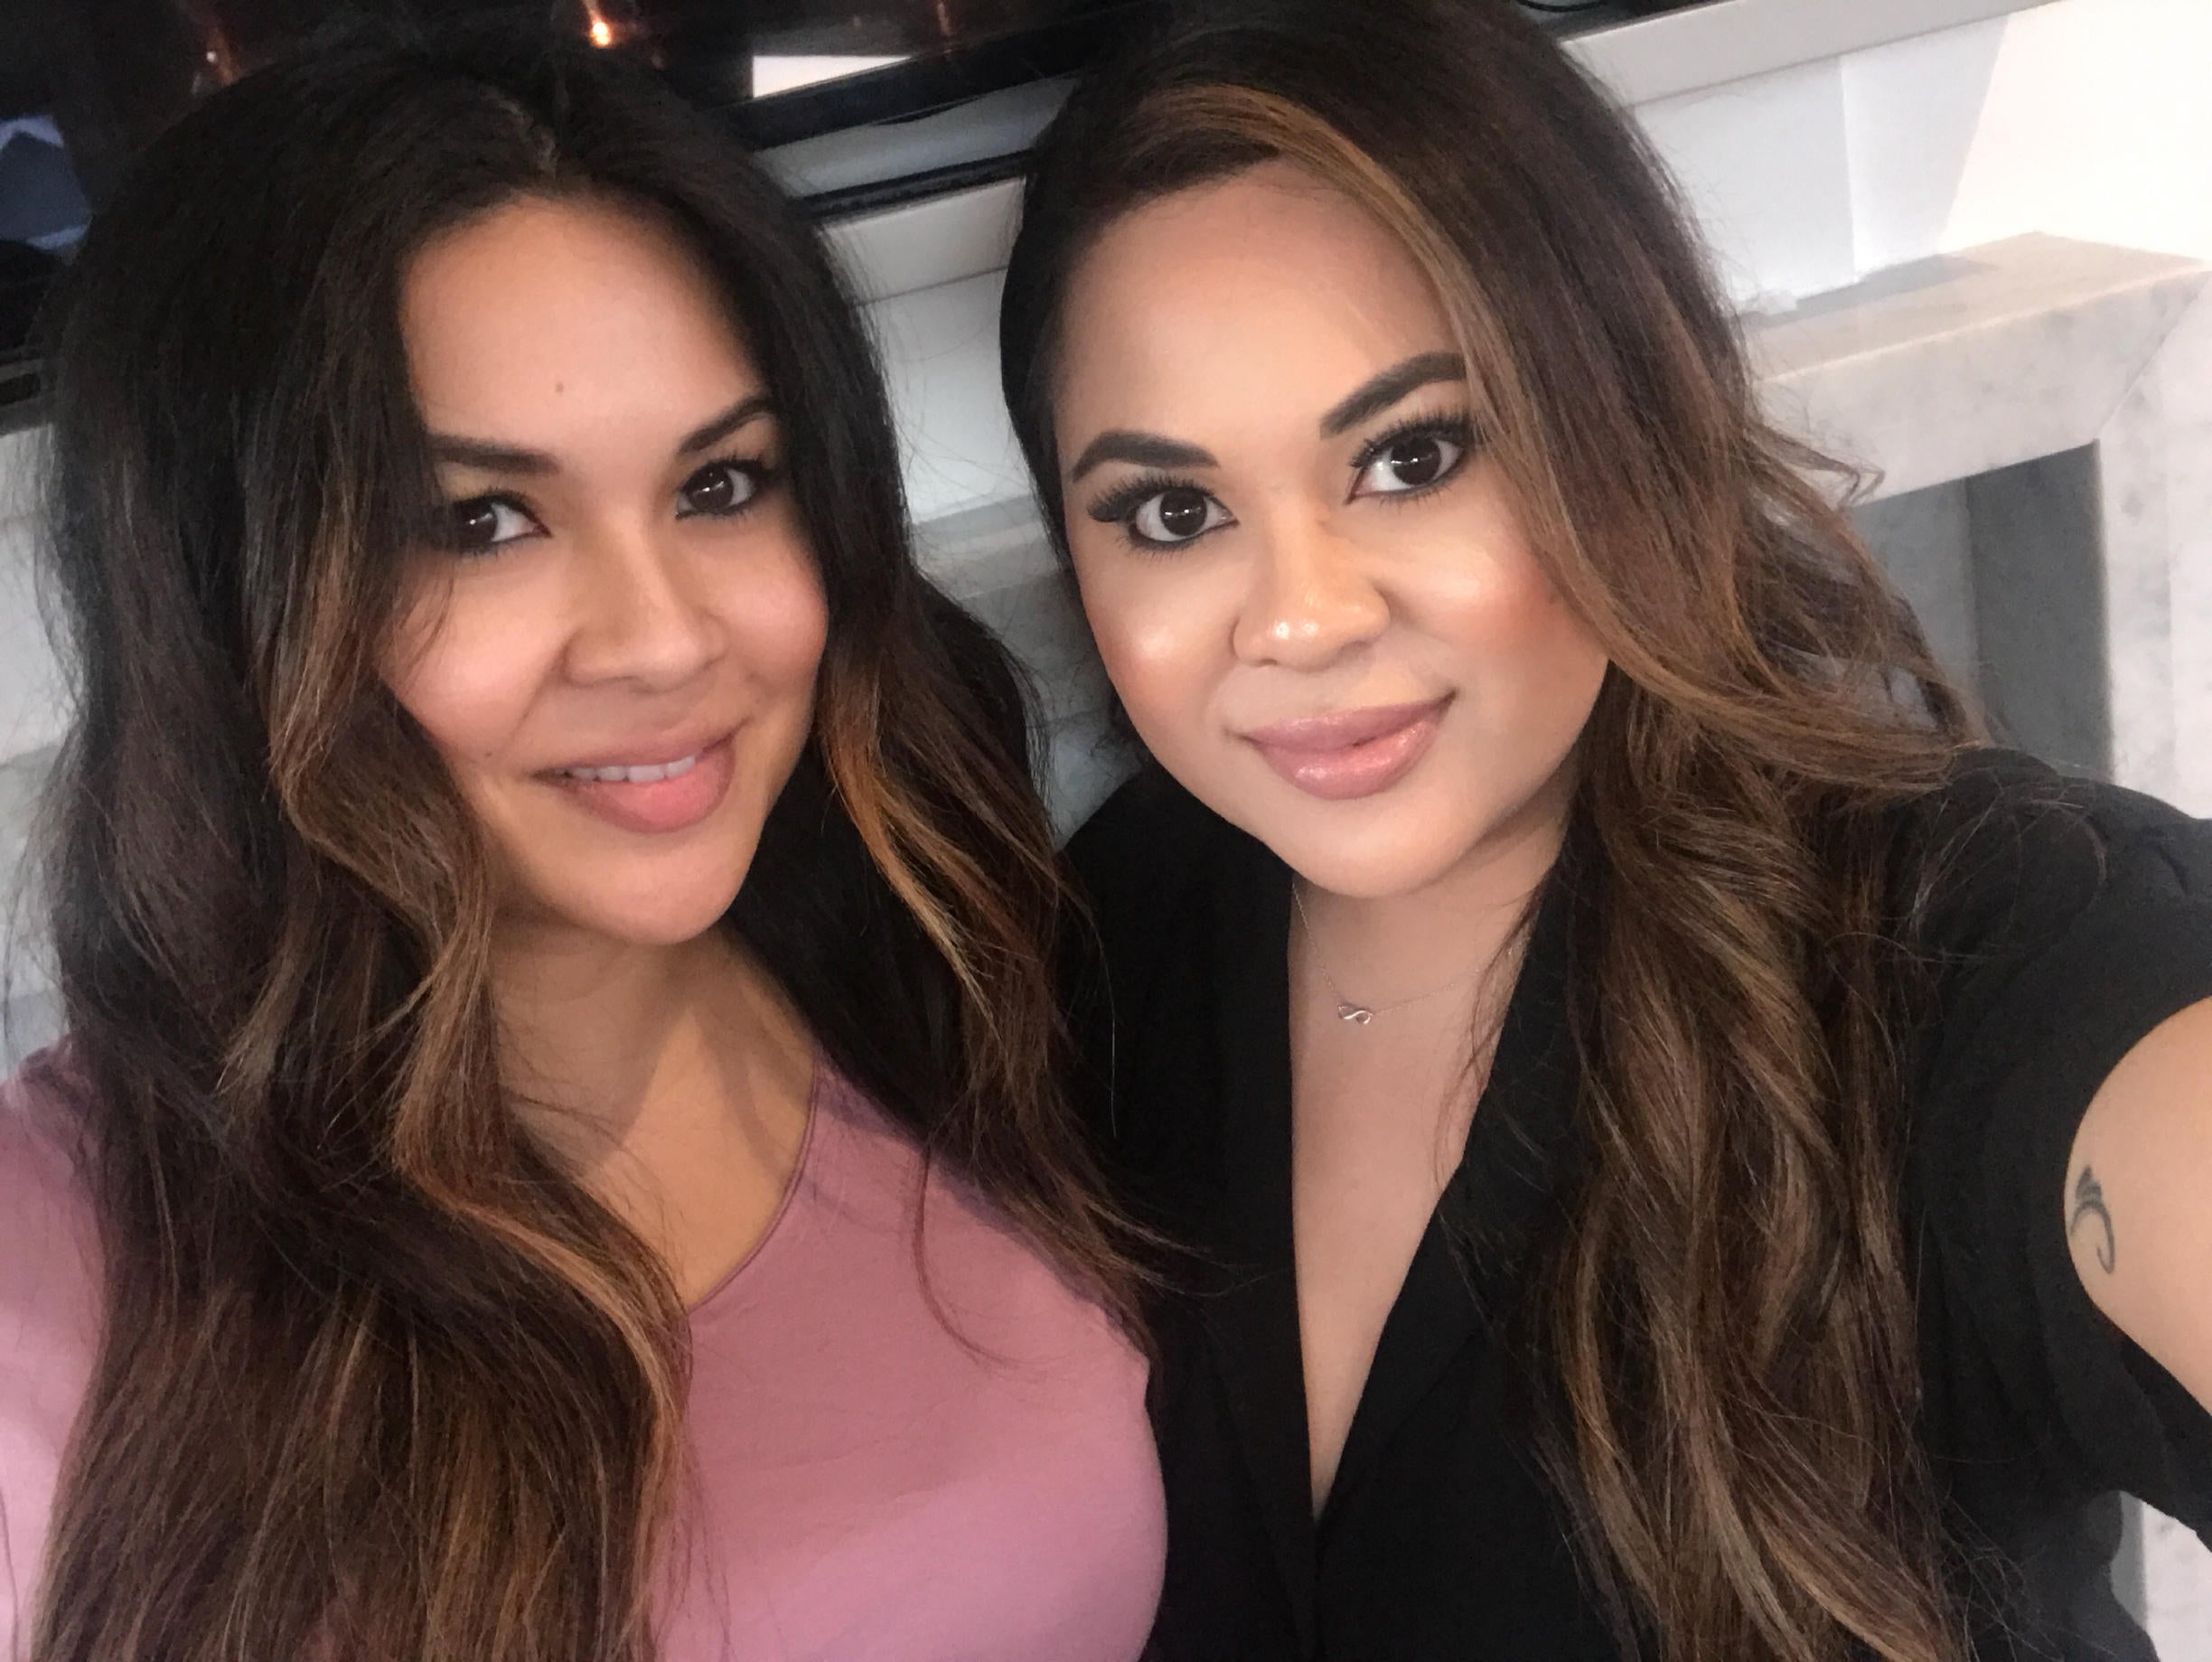 Co-founders of Emme Hair Veronica and Maria